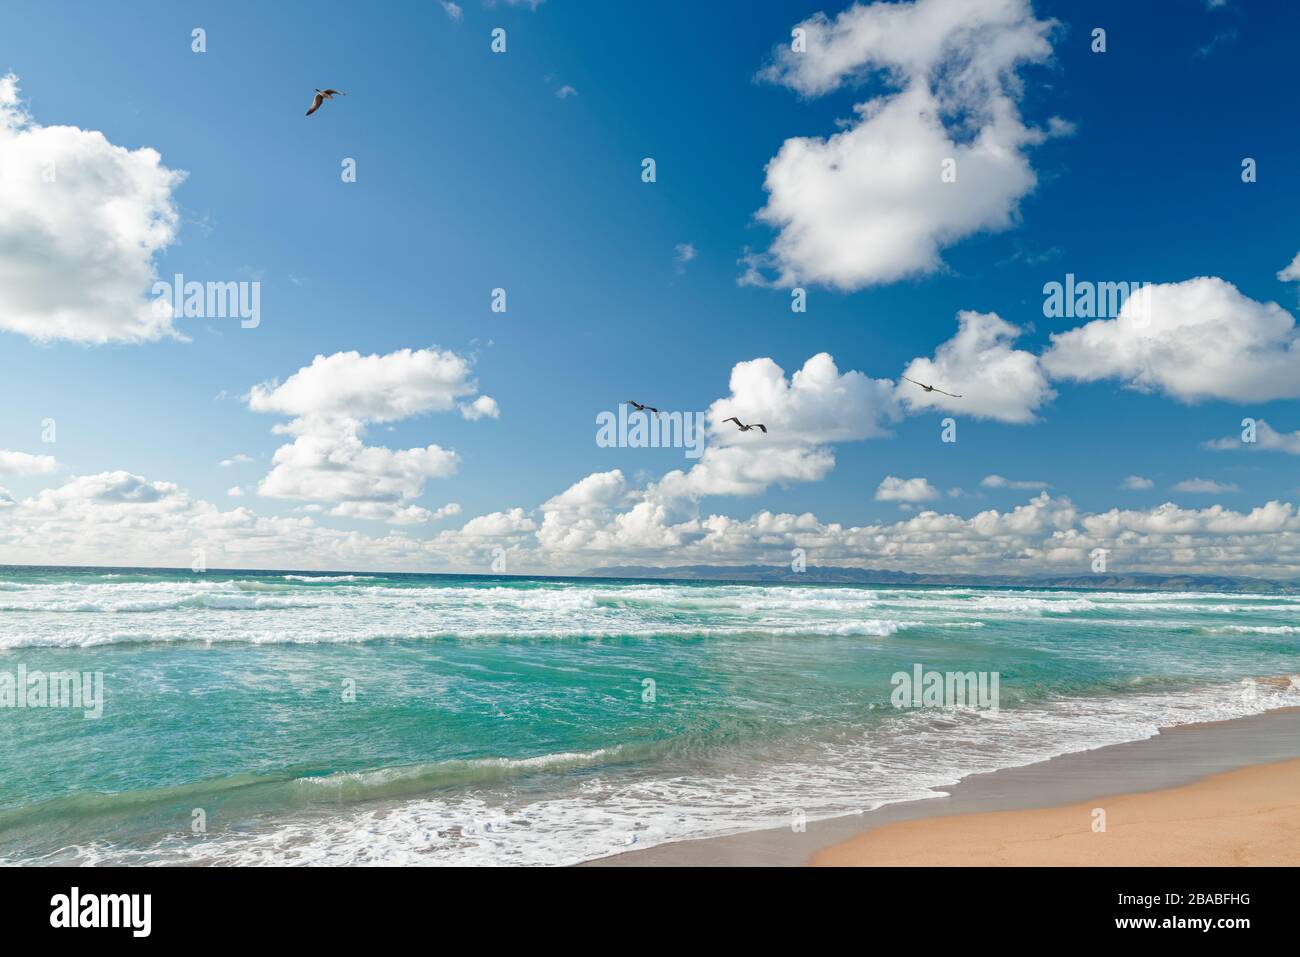 Beach scene. Beautiful turquoise colored ocean, cloudy sky, and flock of flying birds Stock Photo